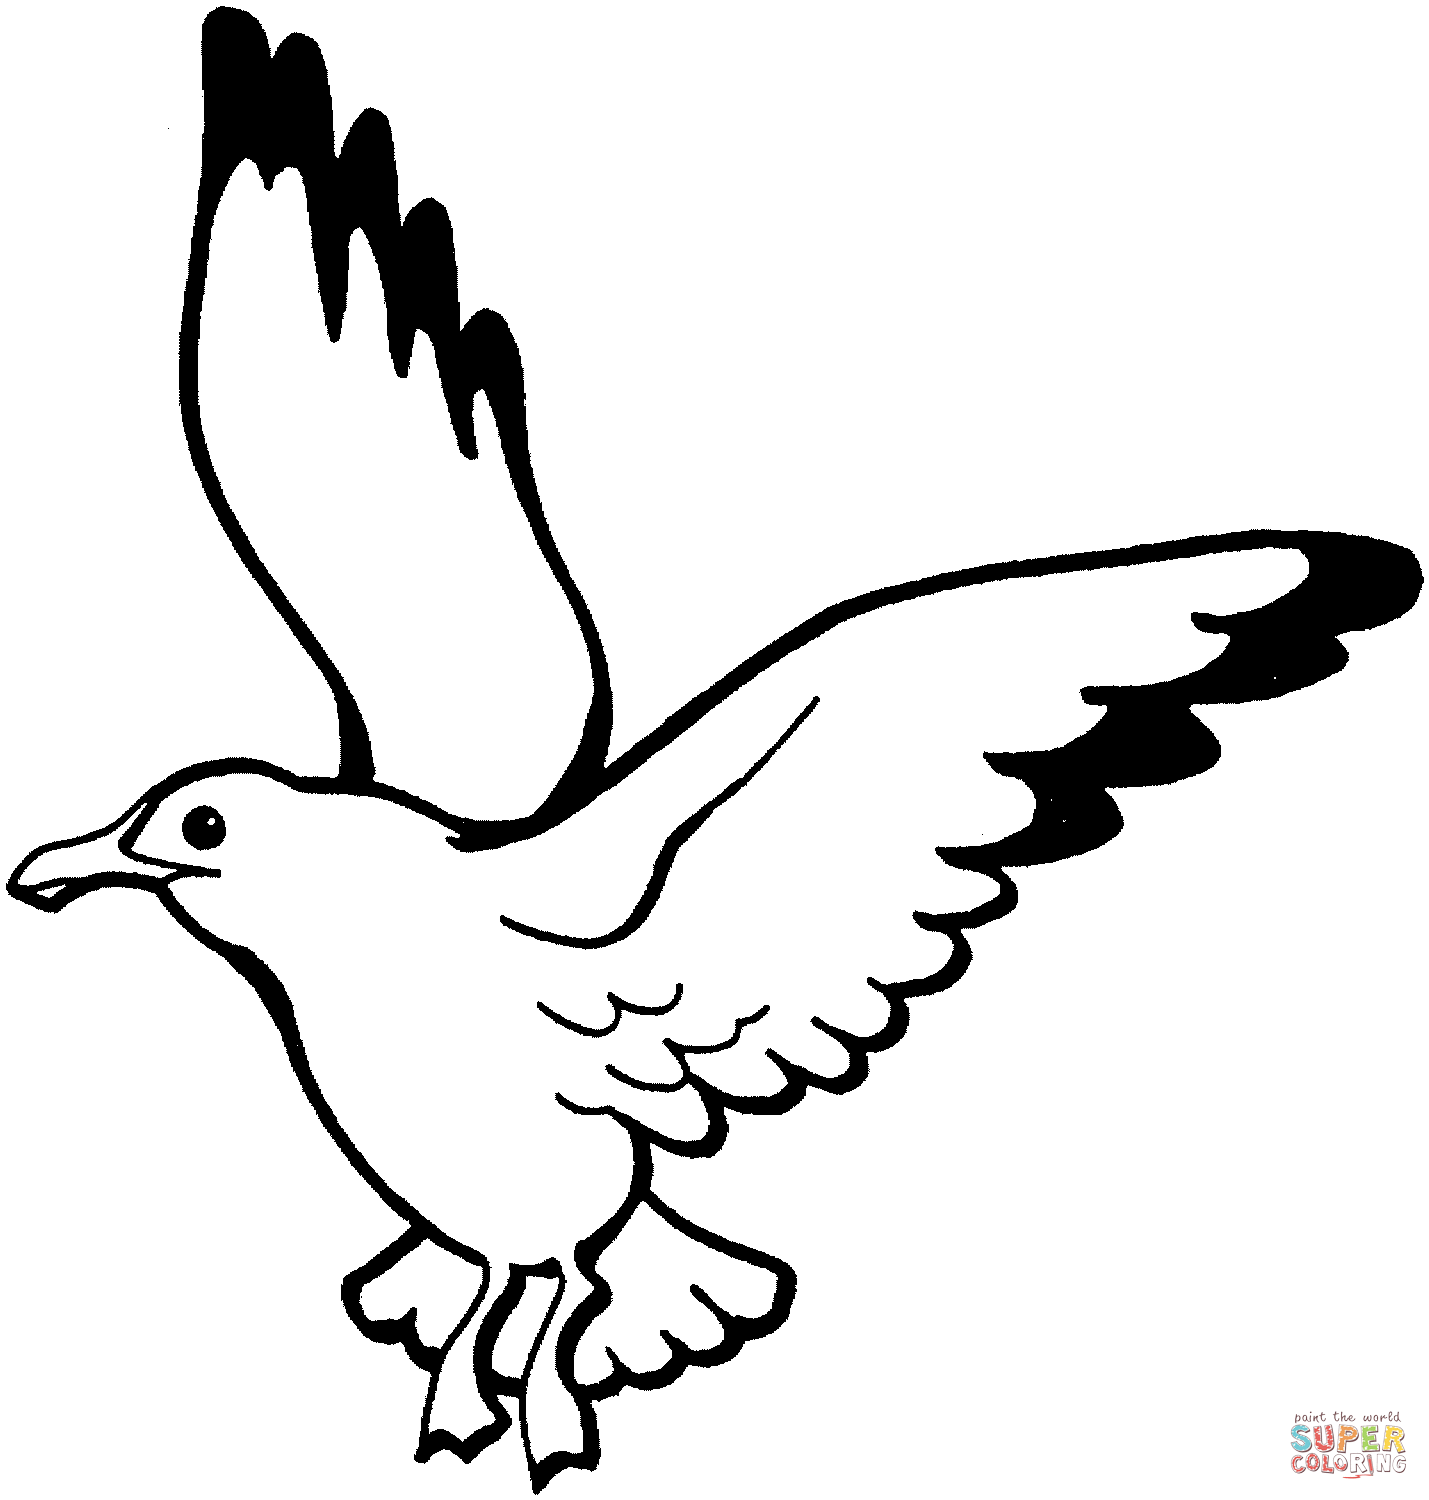 Flying seagull coloring page | Free Printable Coloring Pages